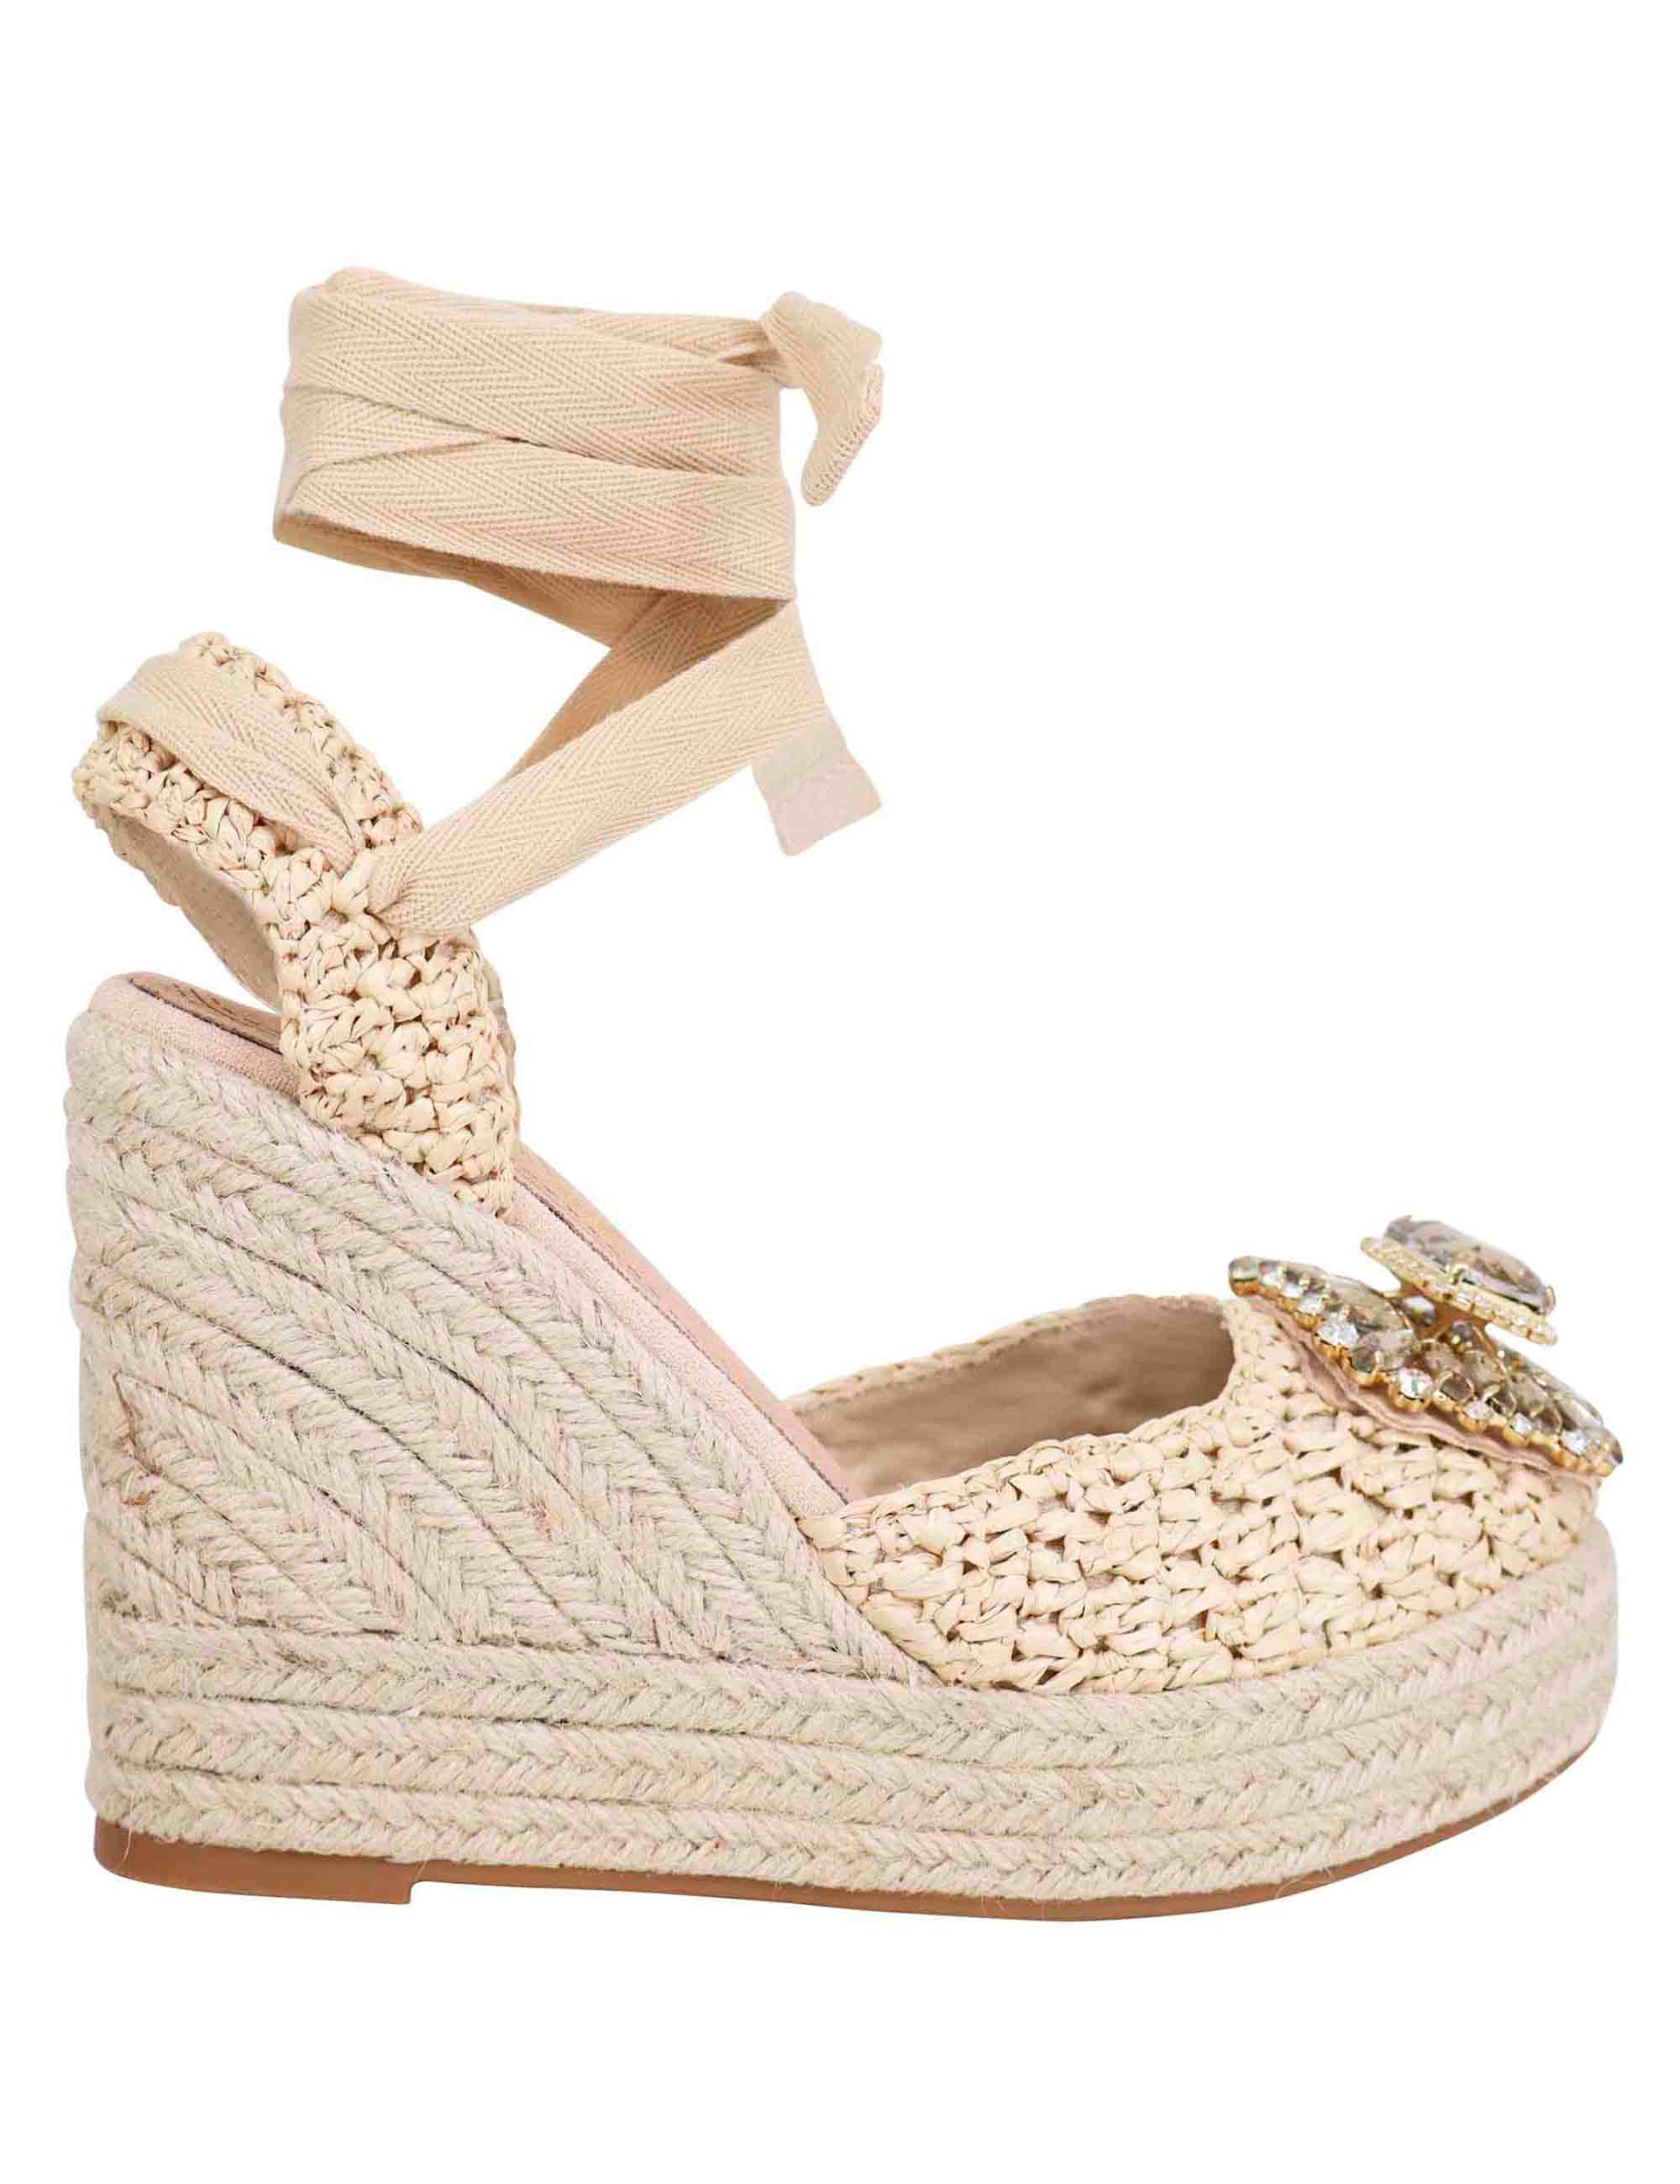 Women's espadrilles sandals in beige fabric with buckle with matching stones and high rope wedge